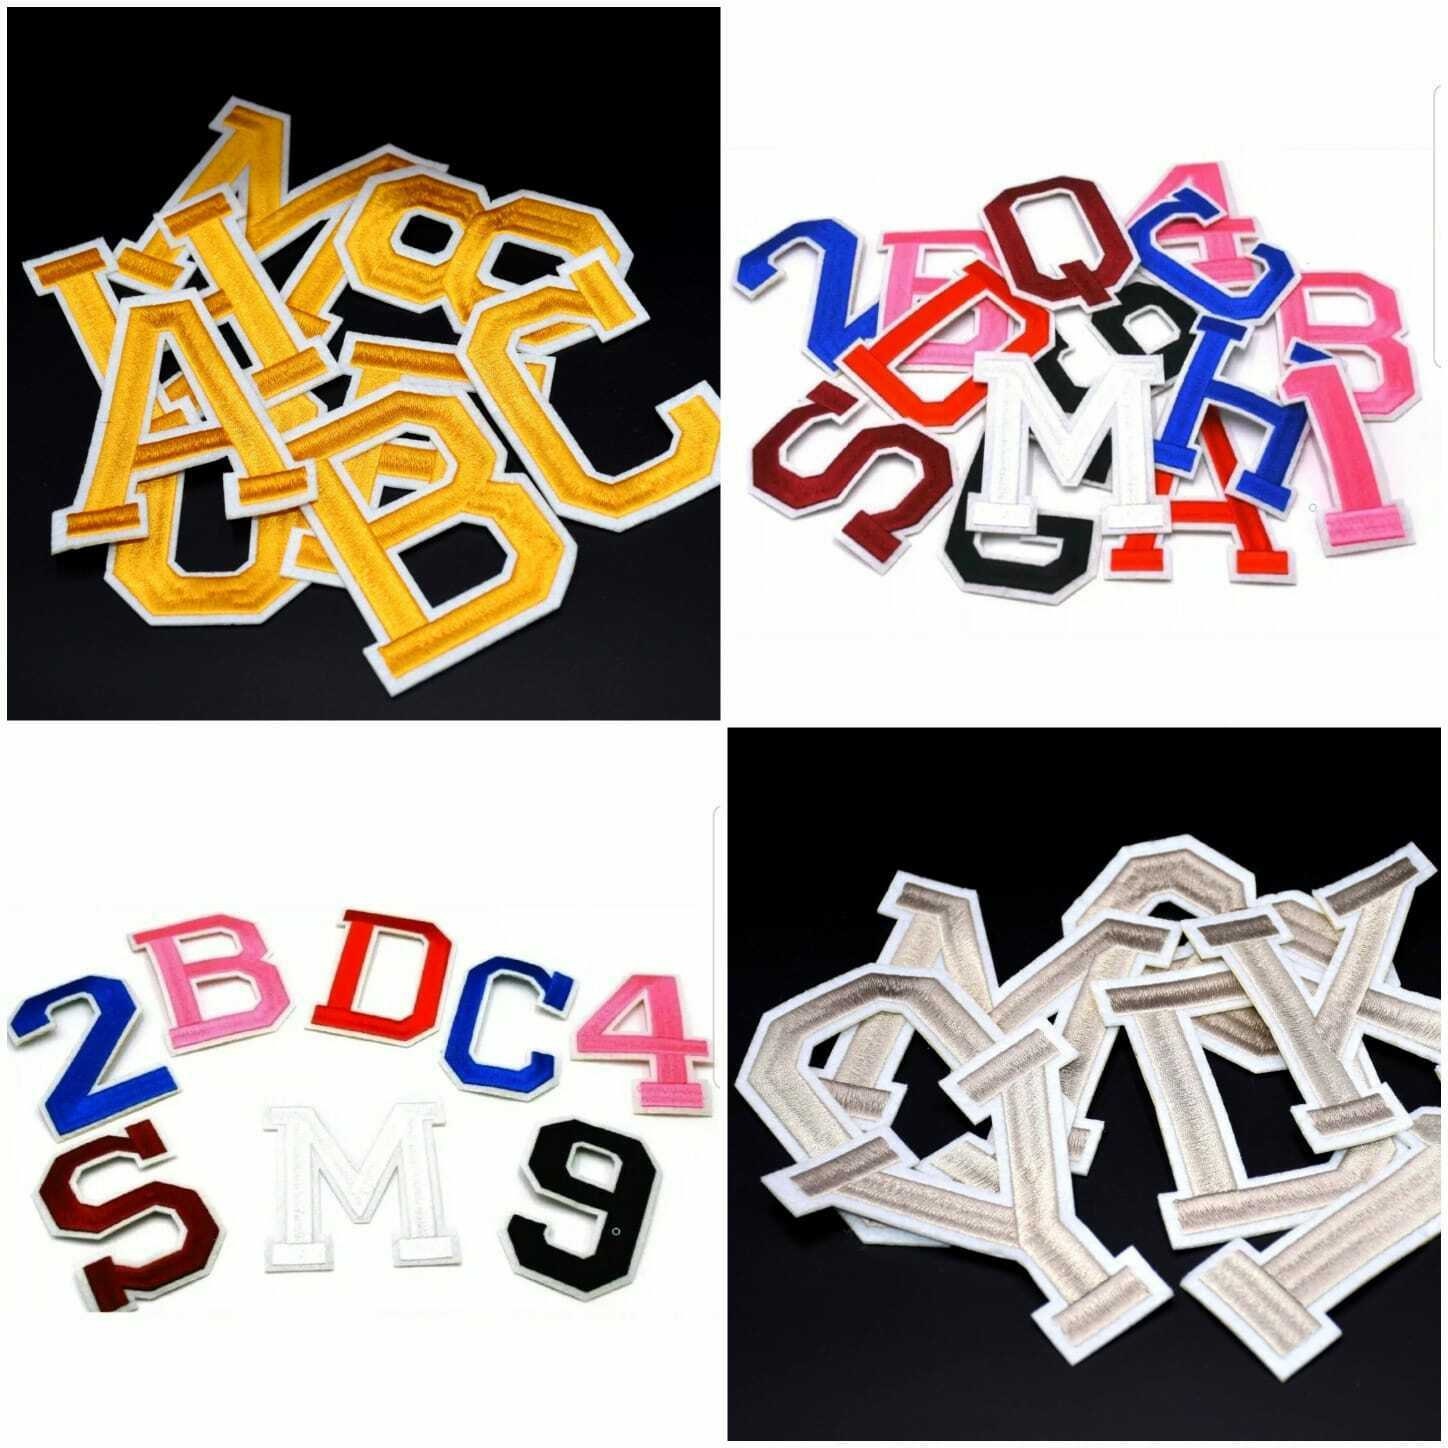 Letter Number Chenille Patch Synonymes Embroidery Patch Synonym Alphabat  Notions Iron On Backing From Oylabel, $10.13